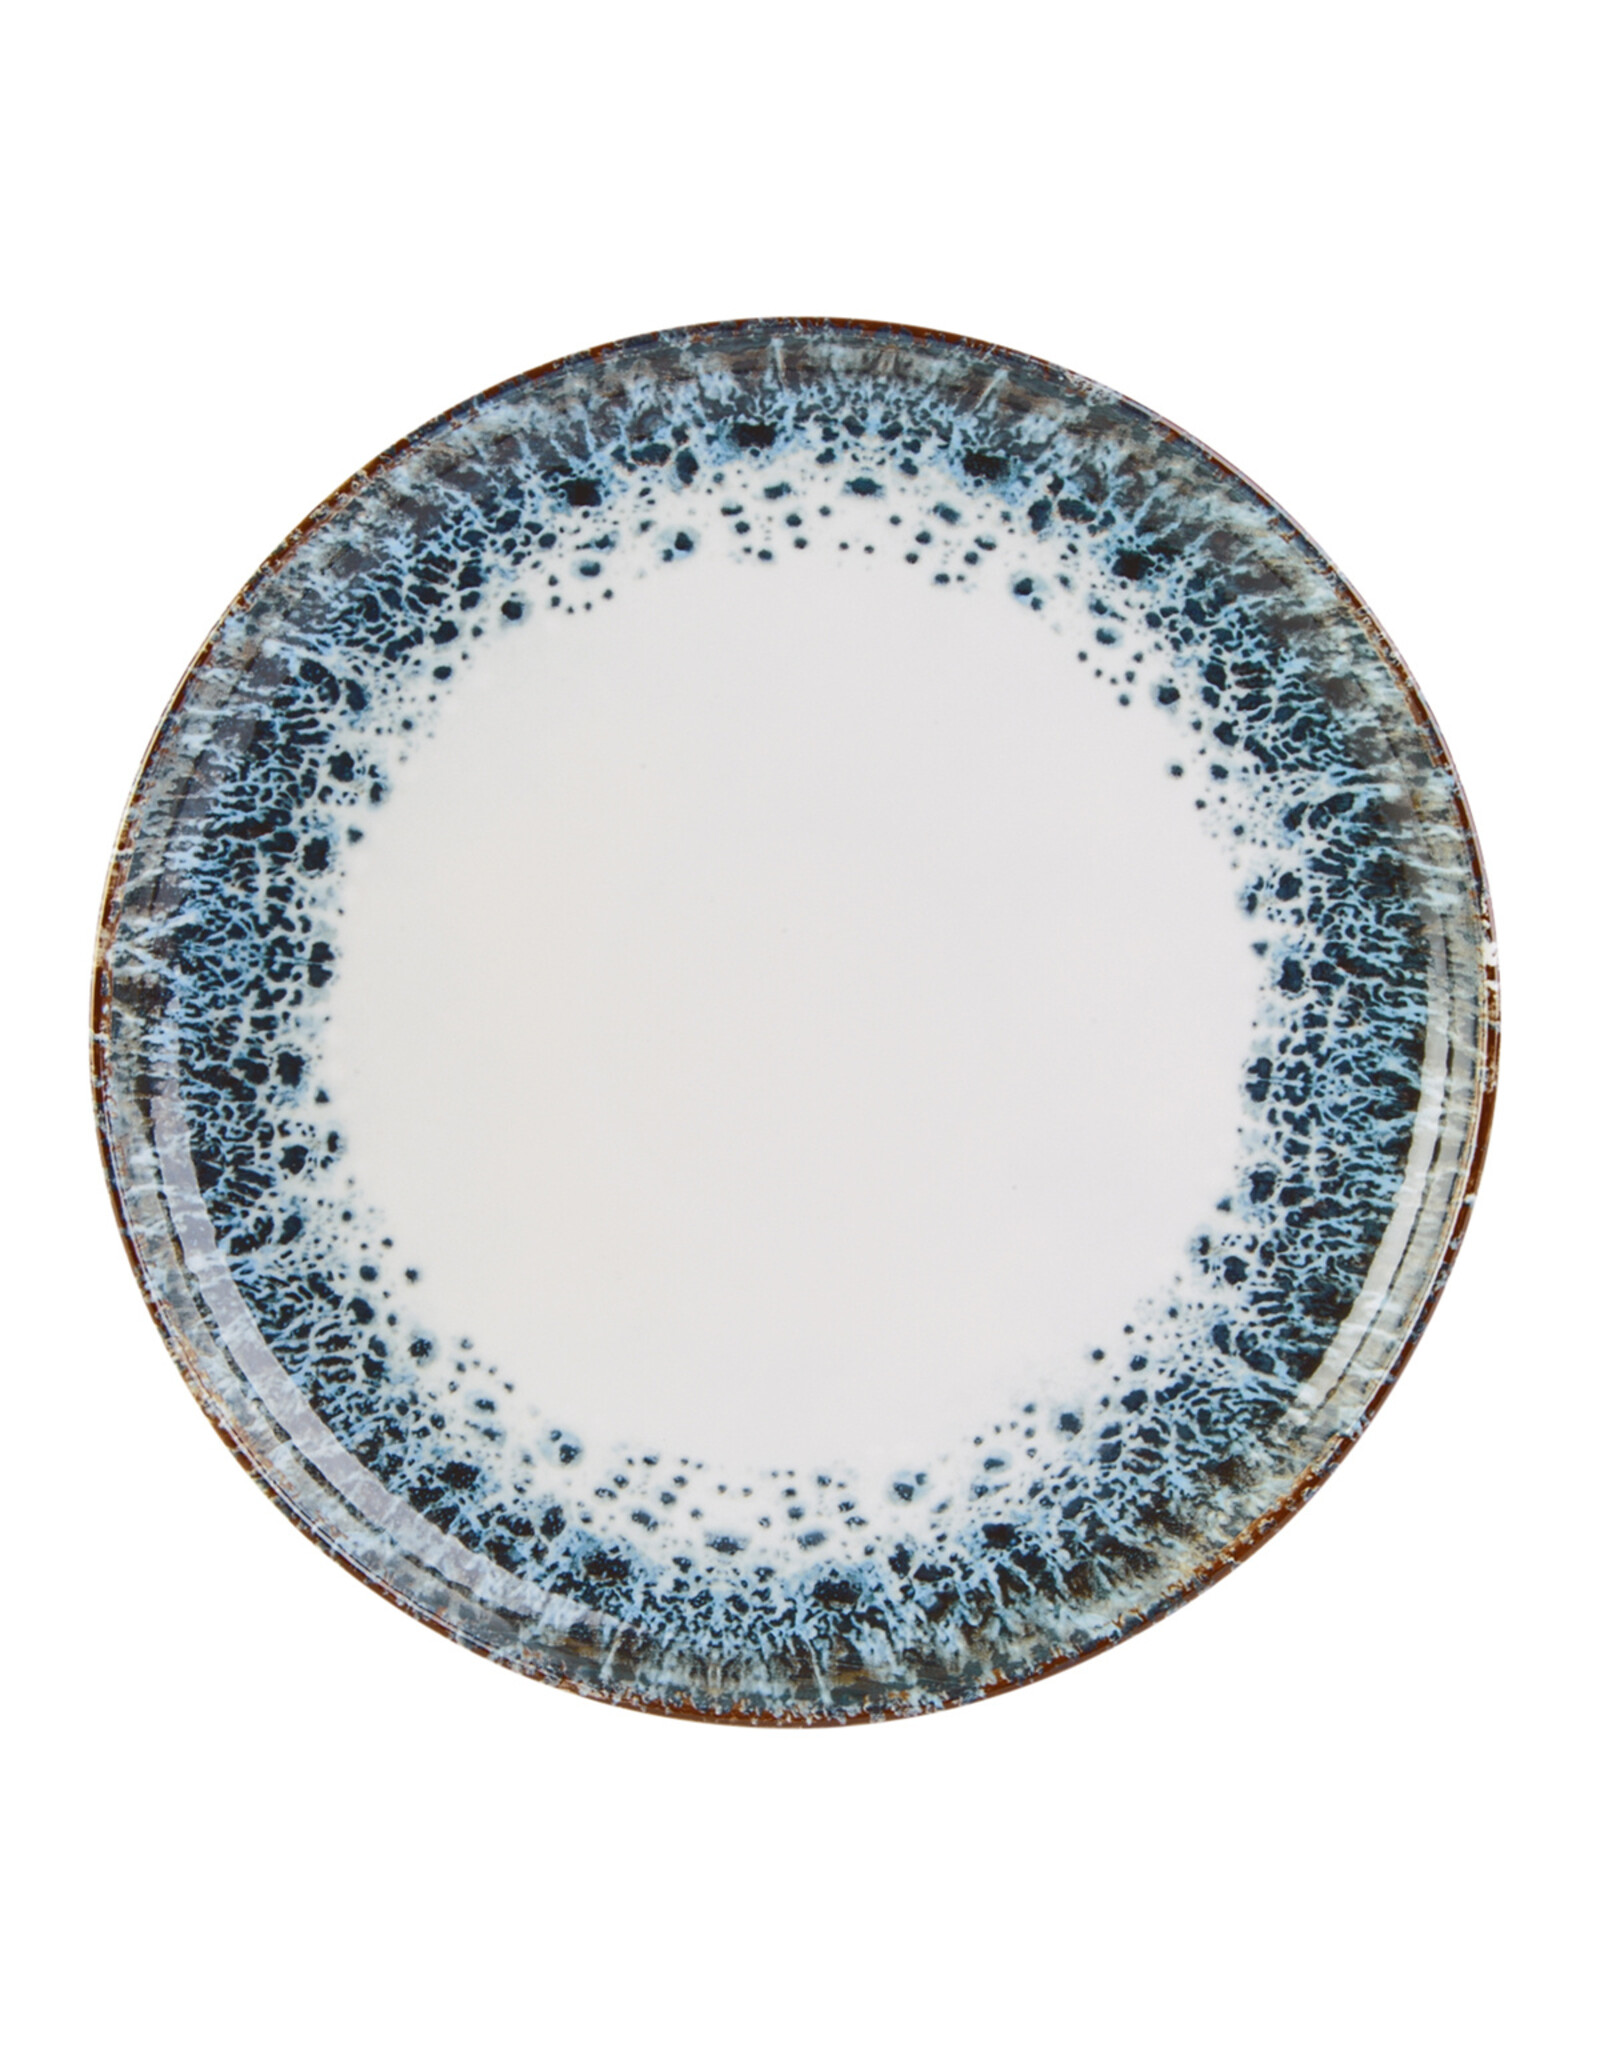 Stylepoint Reef coupe plate 27 cm